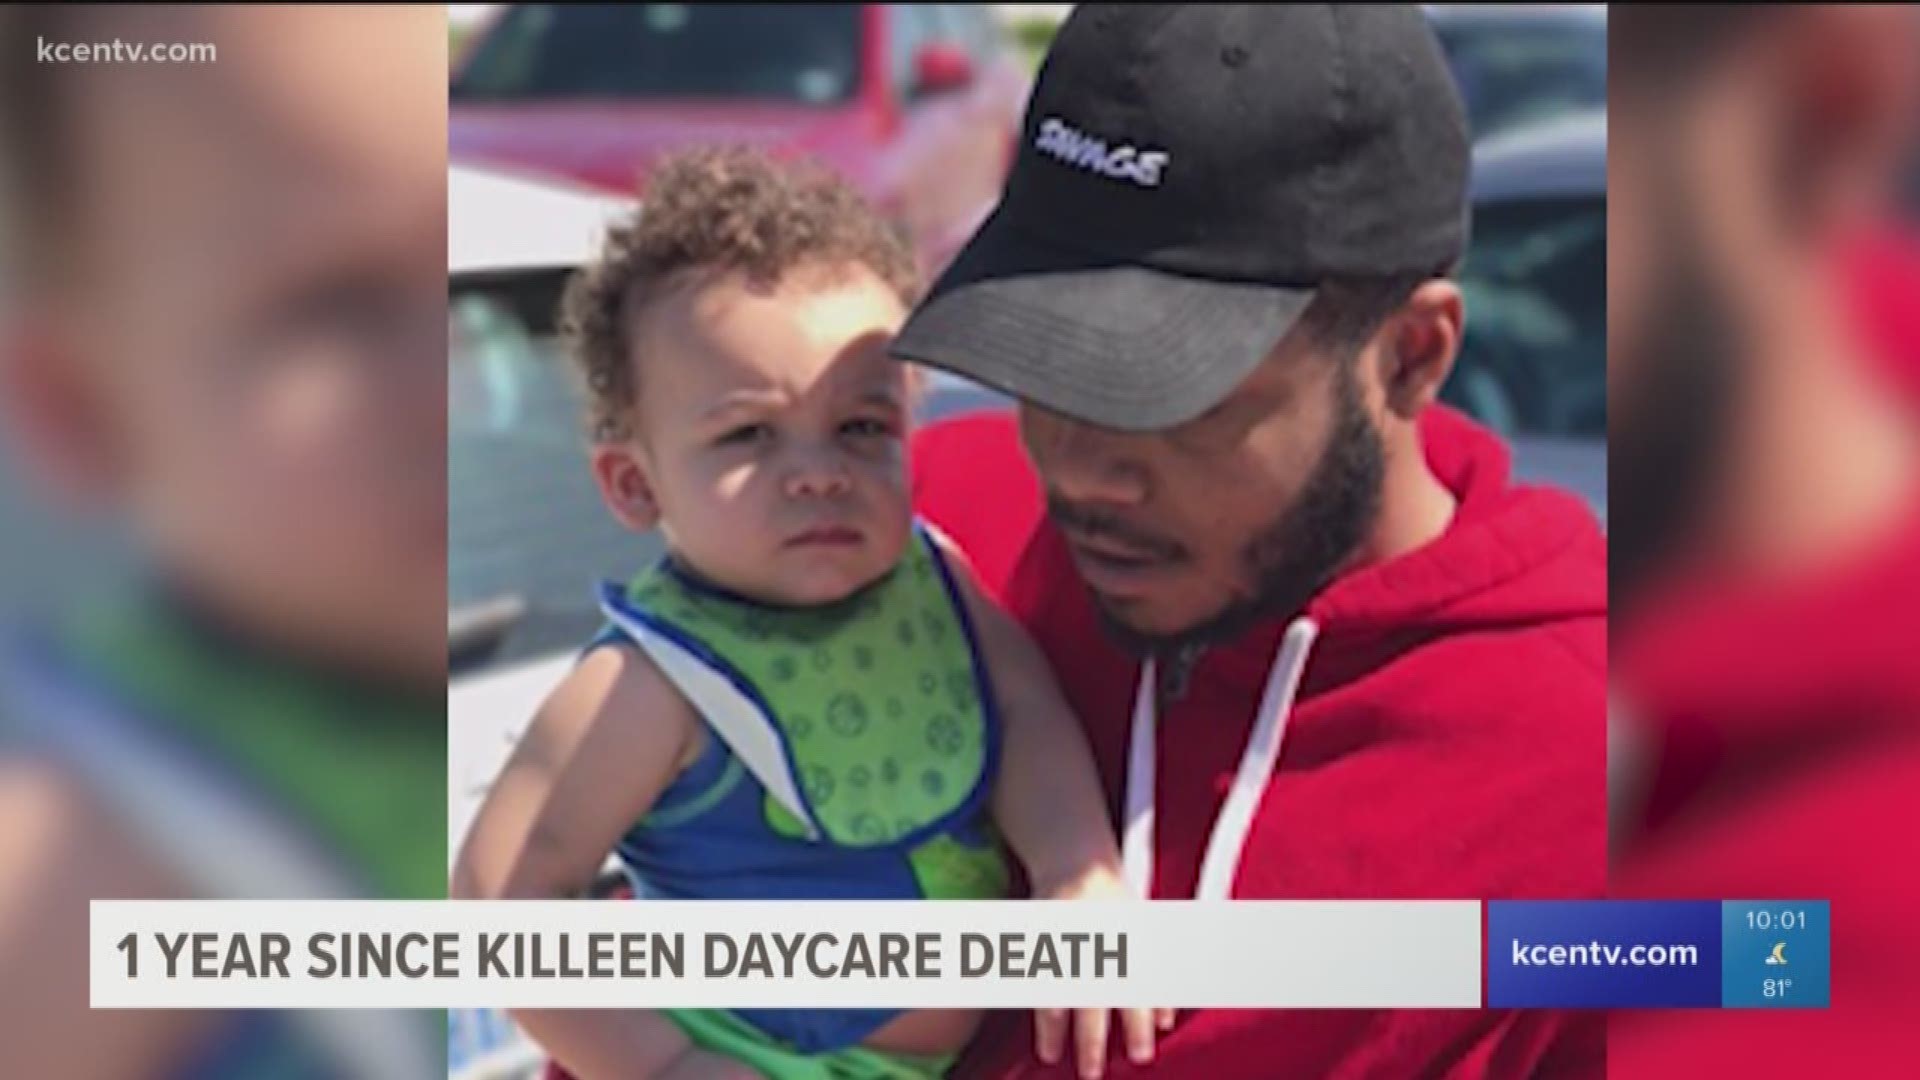 A year after his one-year-old died in the care of an unlicensed daycare worker, a father is taking steps to prevent future tragedies.